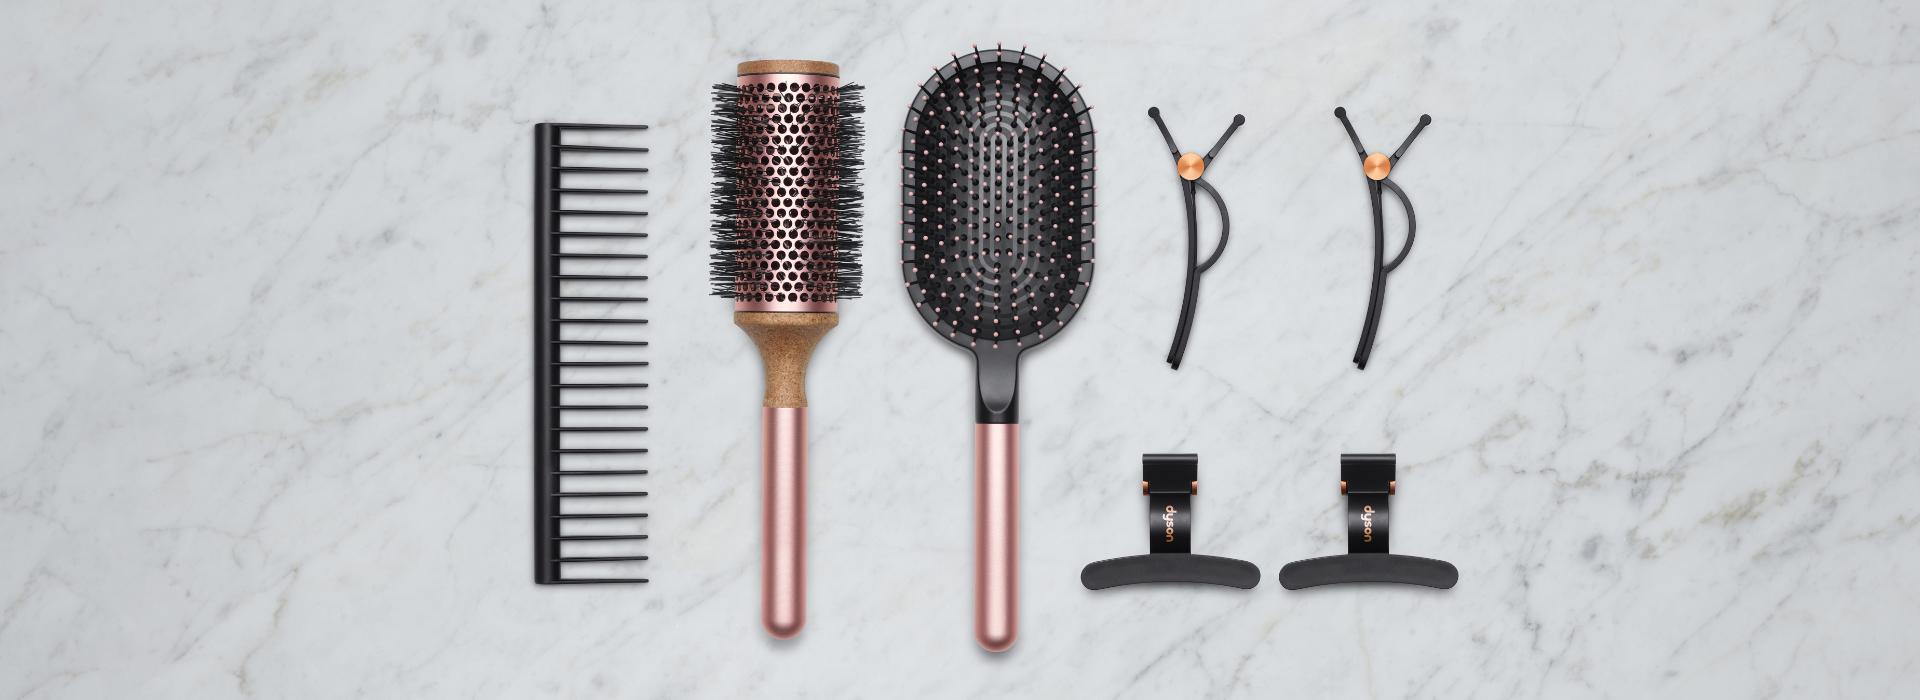 Dyson Styling gift set with five accessories.